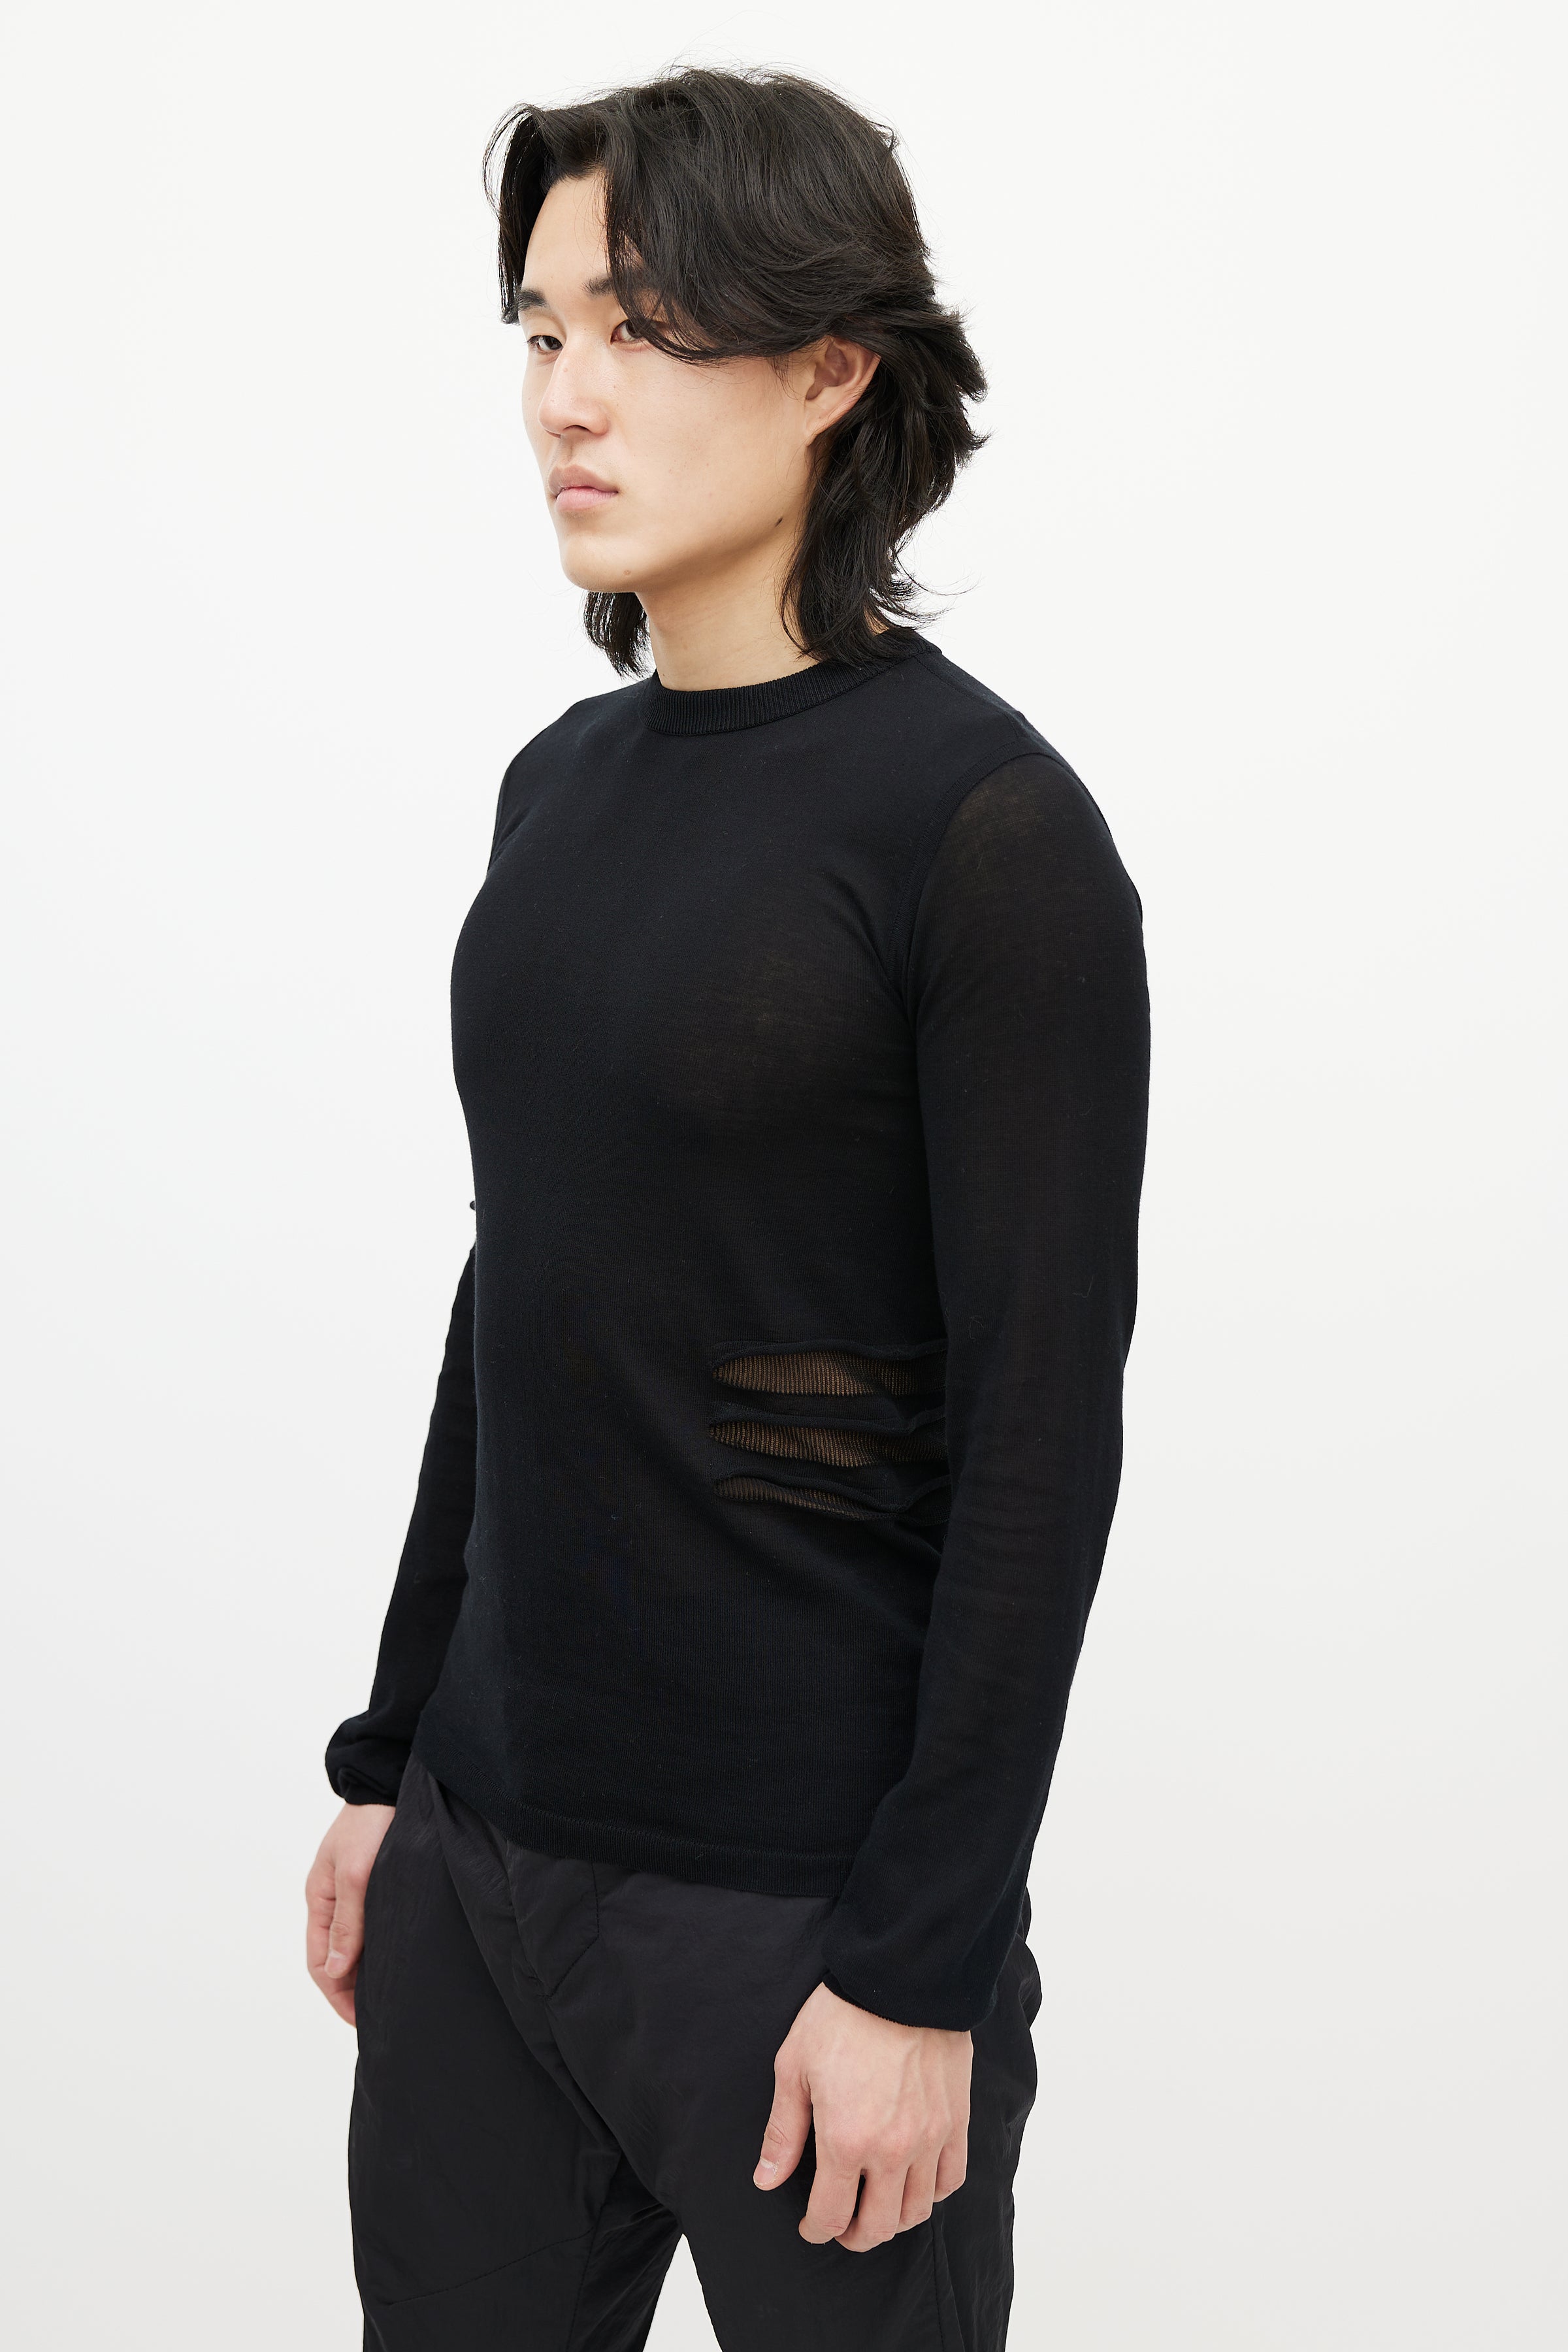 Rick Owens // SS 2019 Black Mesh Cut Out Sweater – VSP Consignment